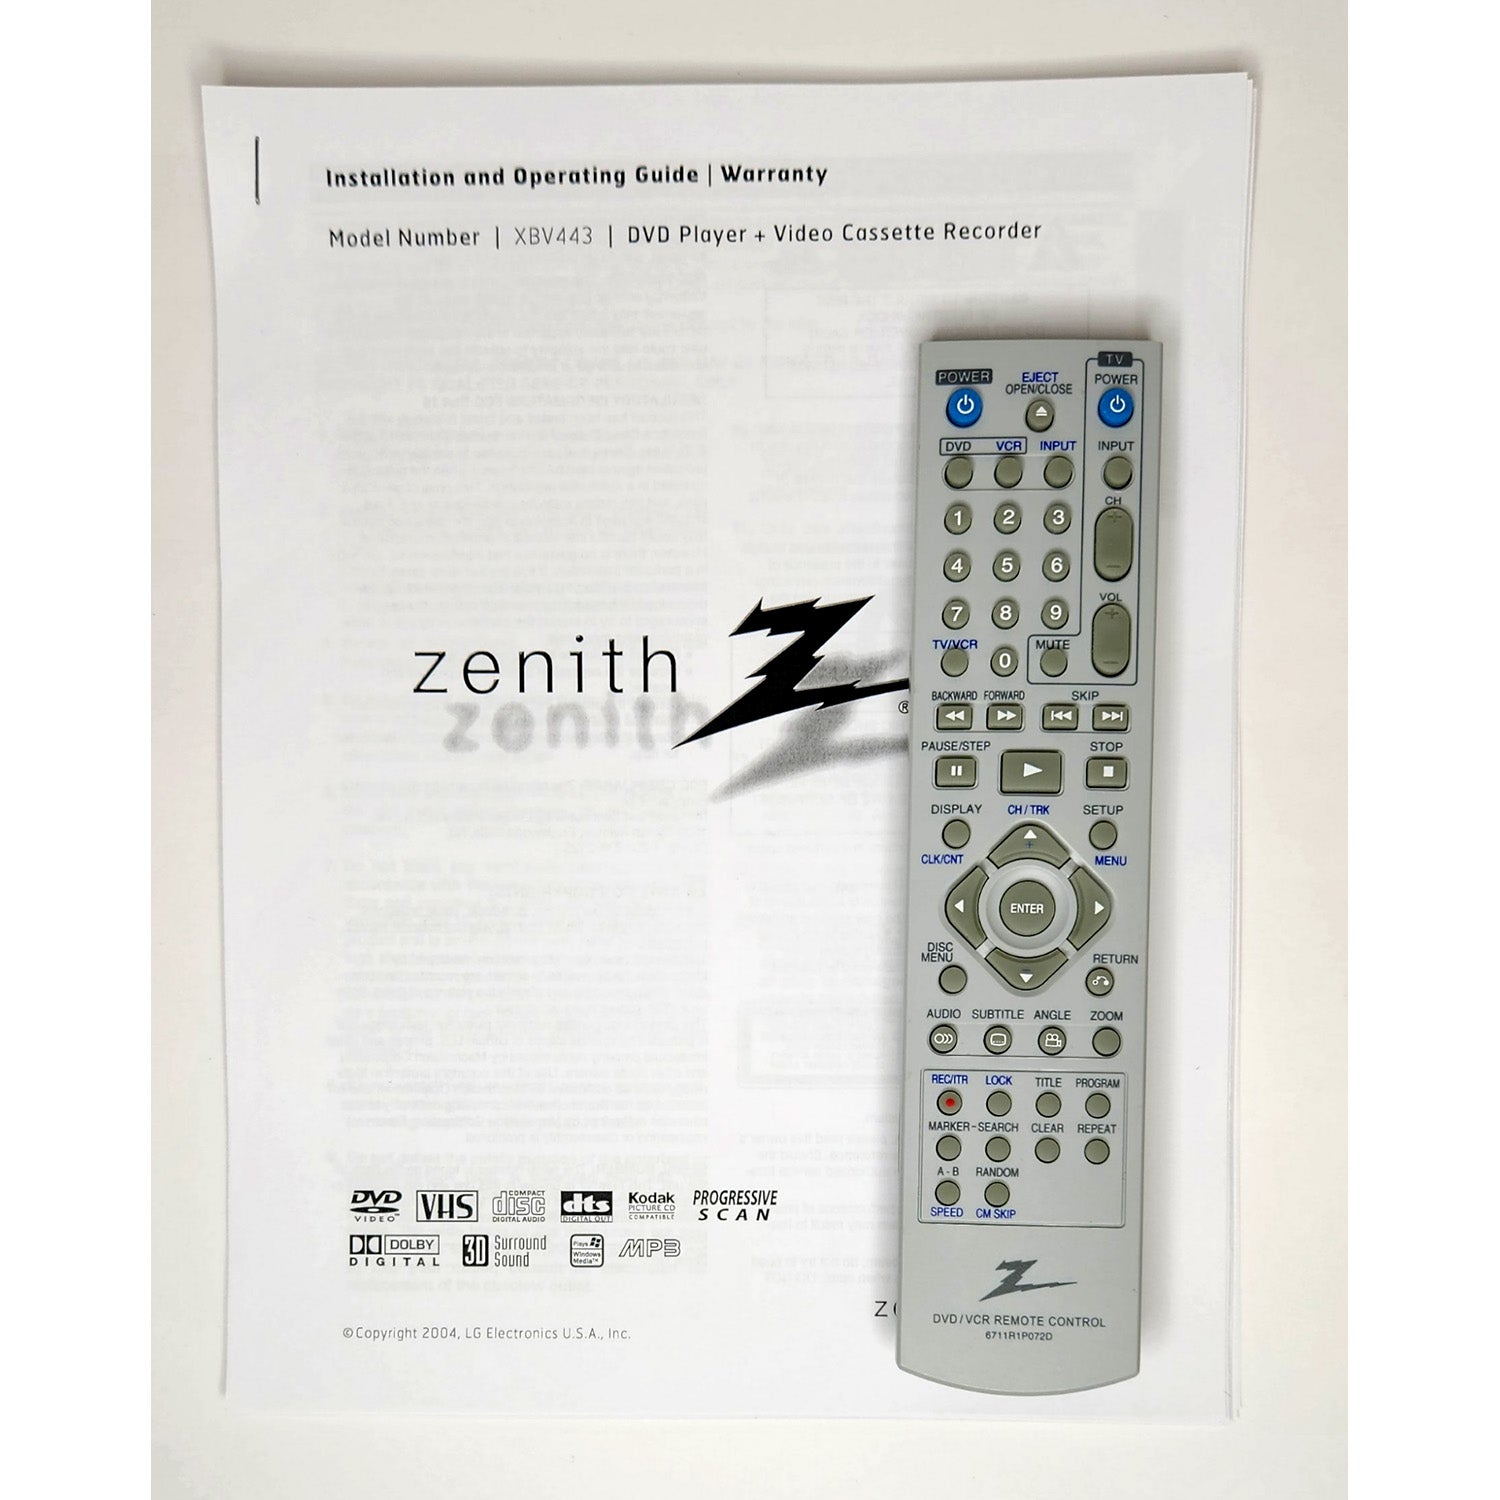 Zenith XBV443 VCR/DVD Player Combo - Remote Control and Manual